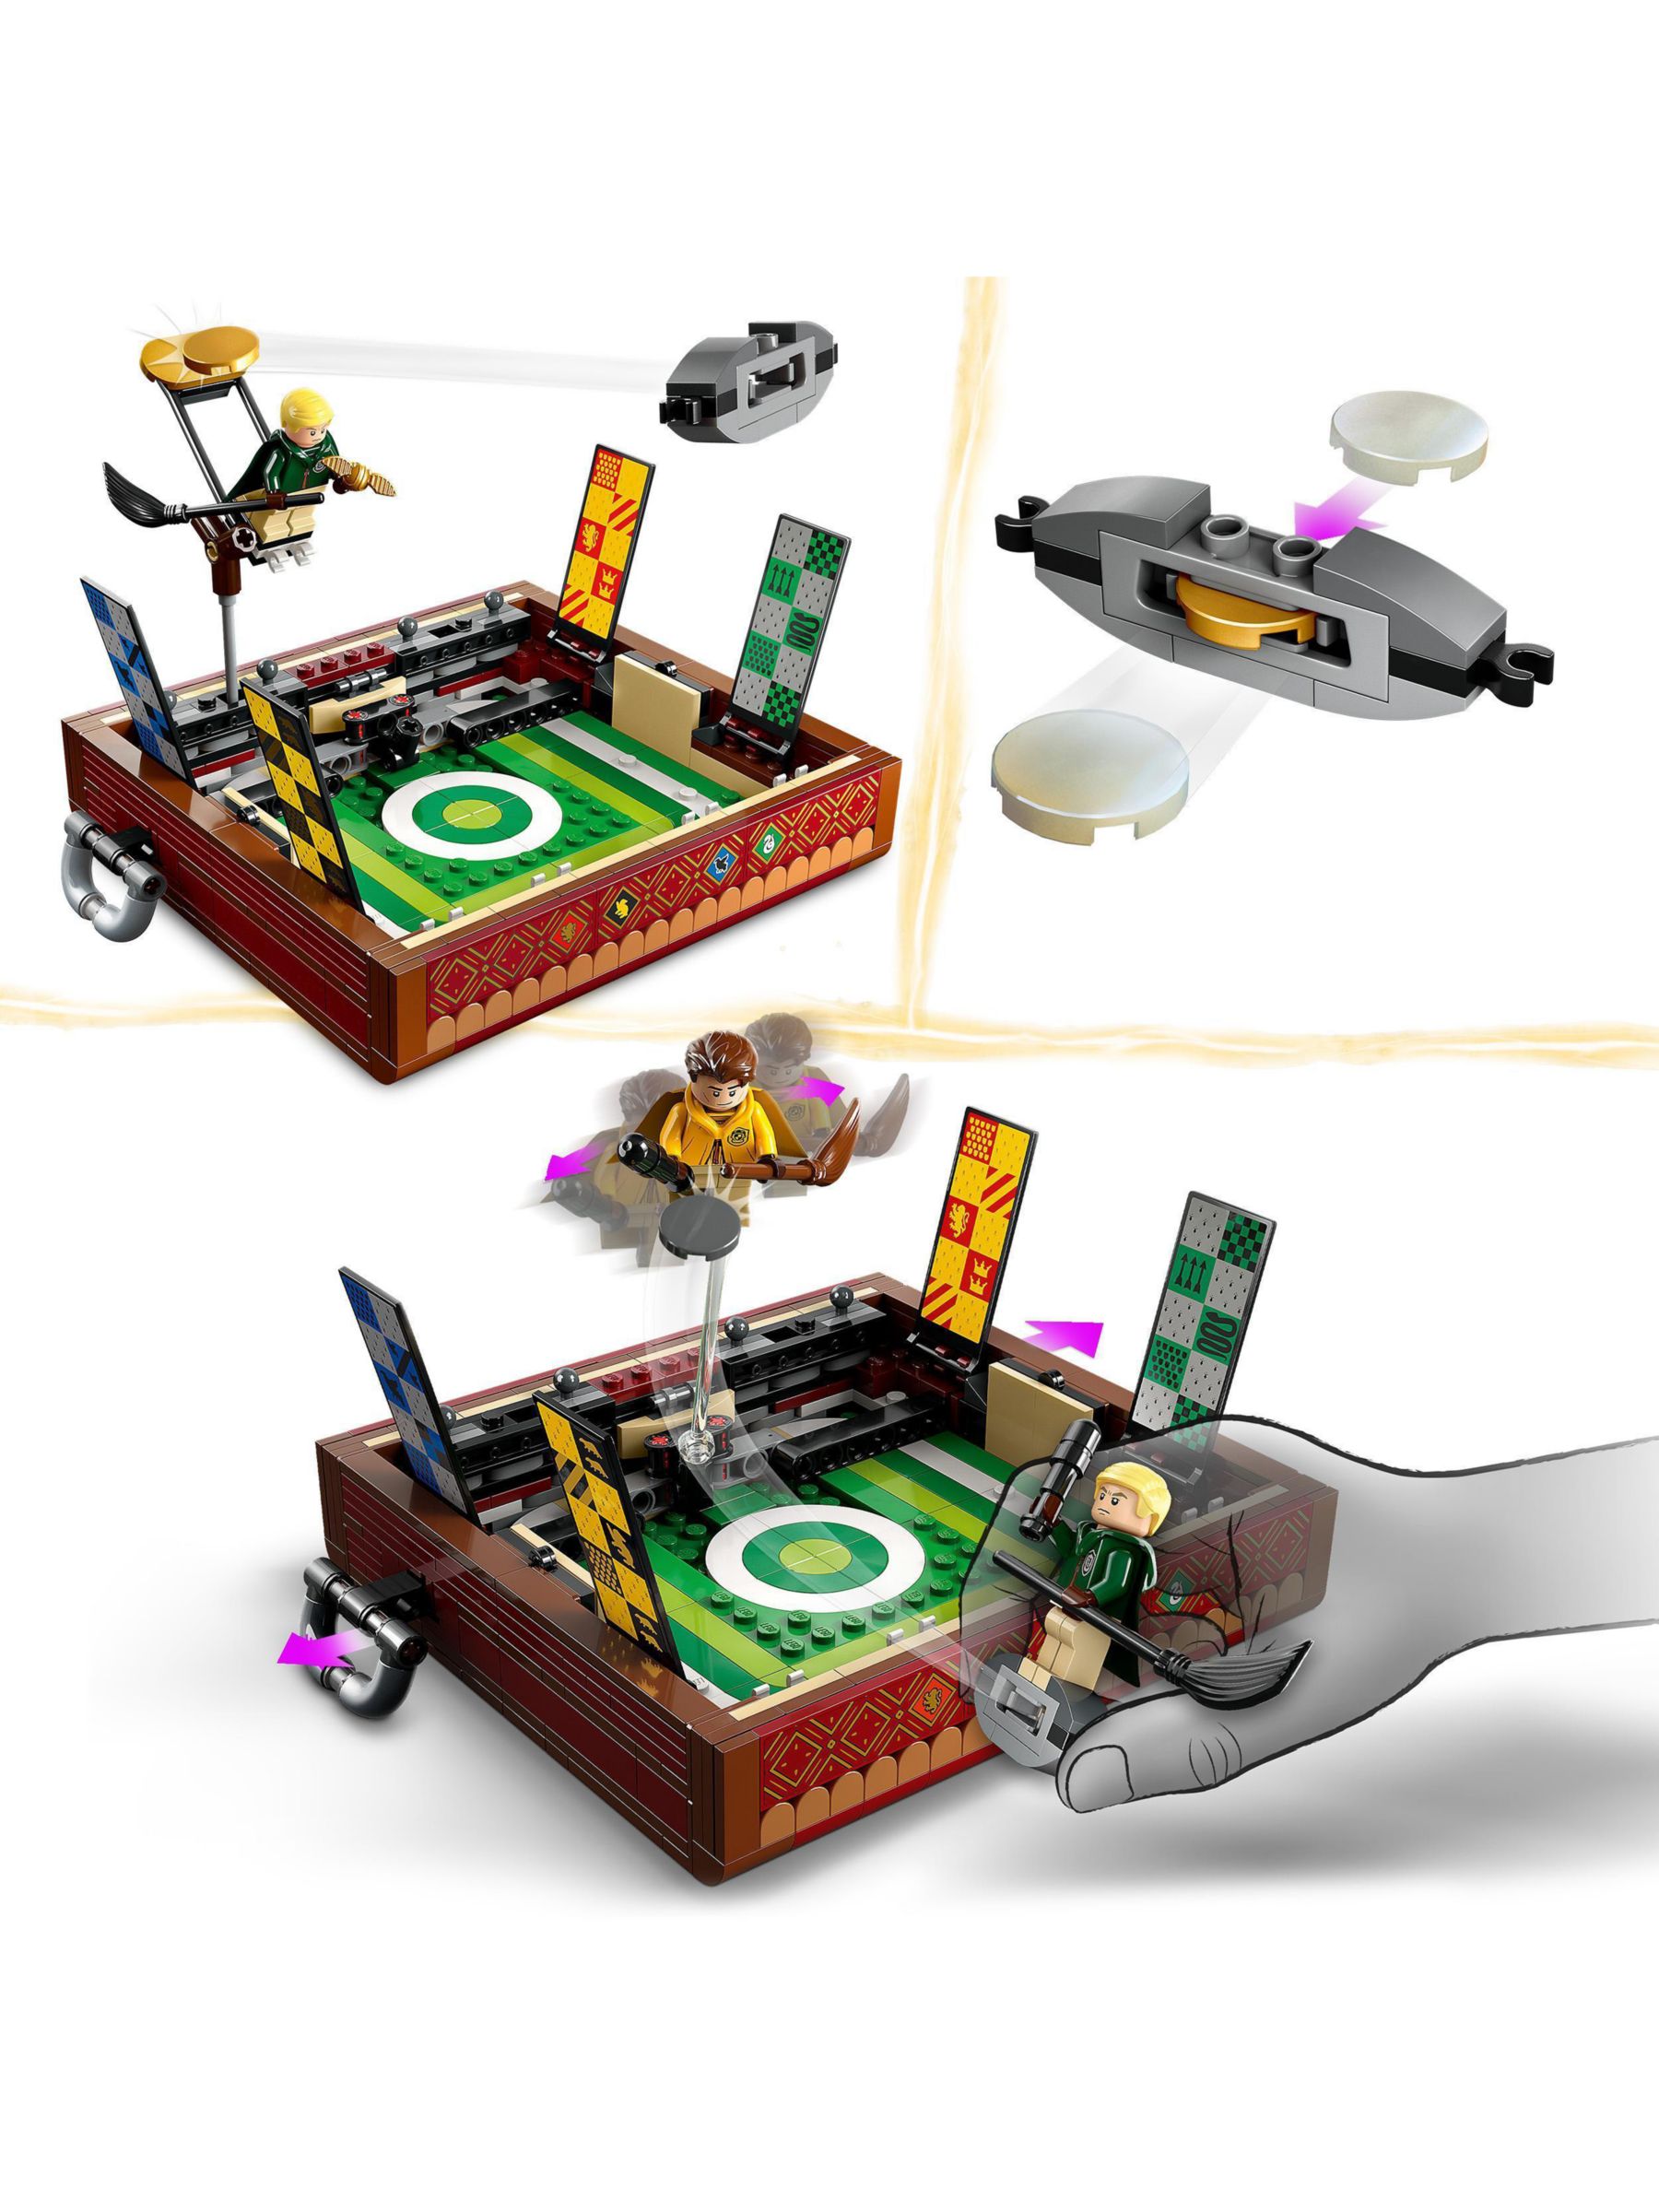 Quidditch™ Trunk 76416, Harry Potter™